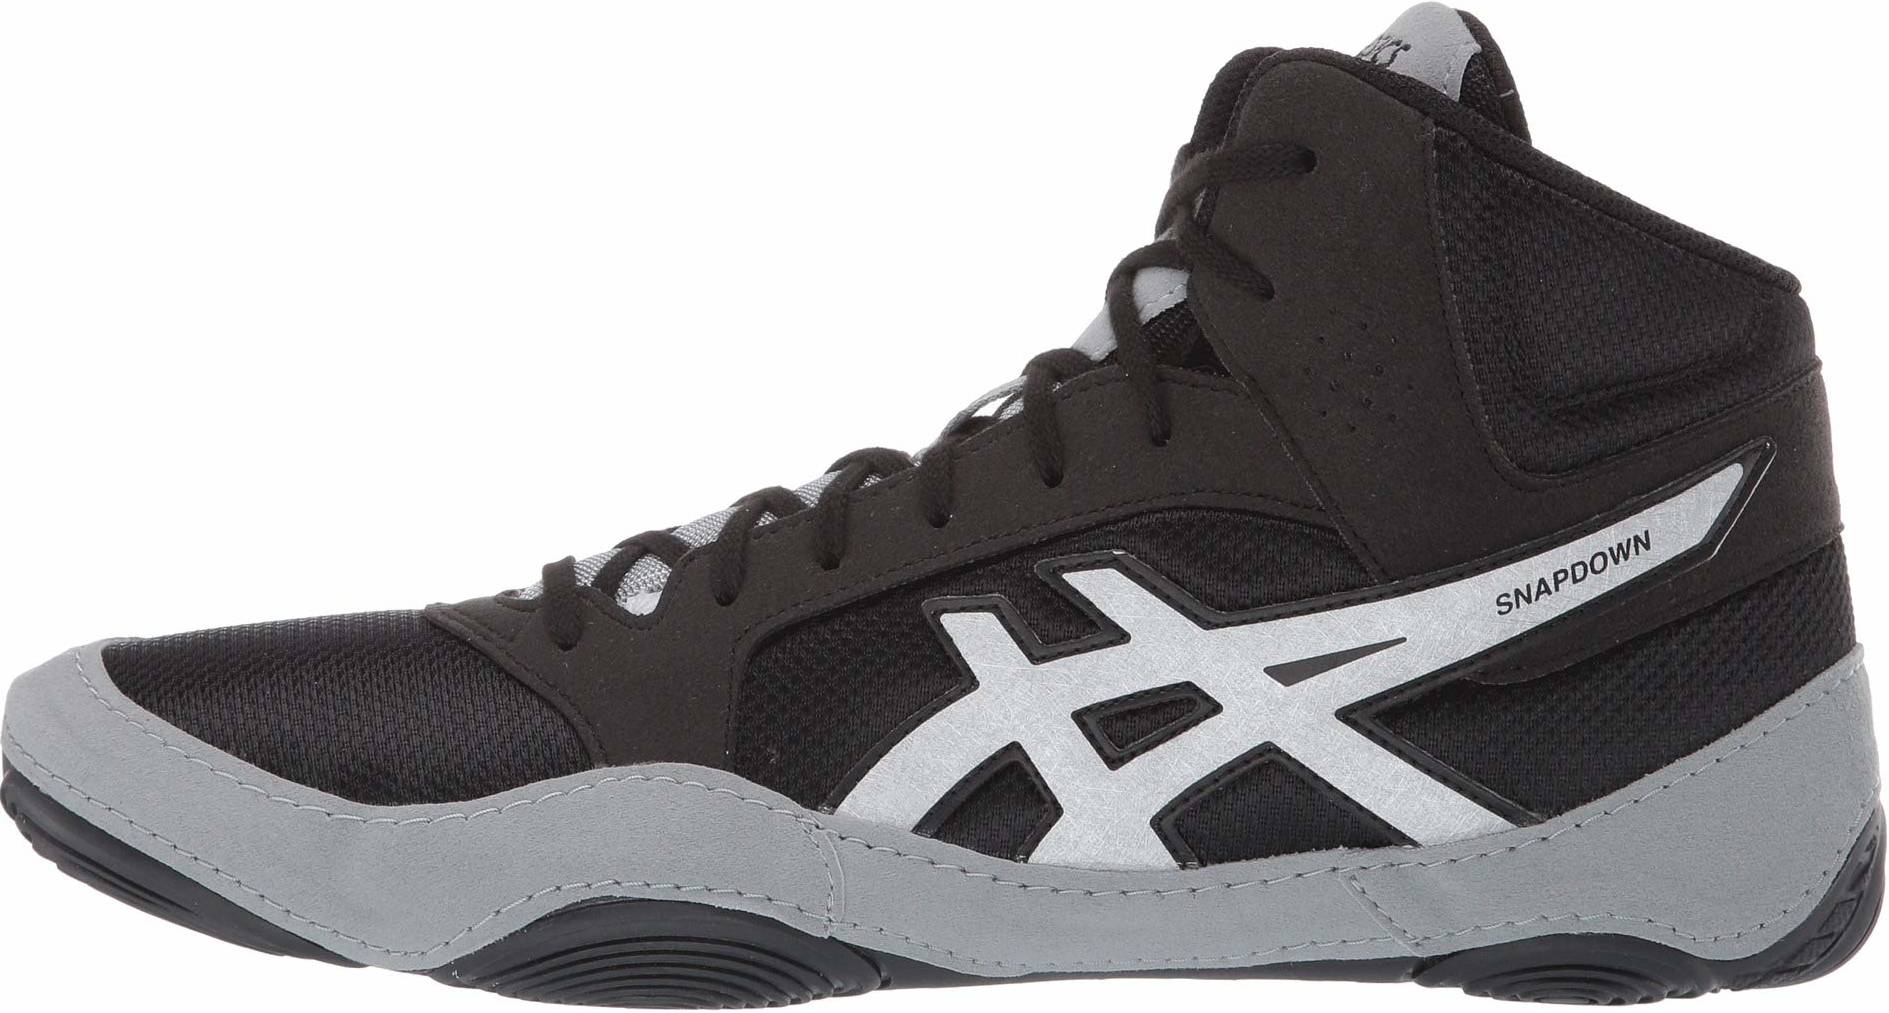 Only $45 + Review of Asics Snapdown 2 